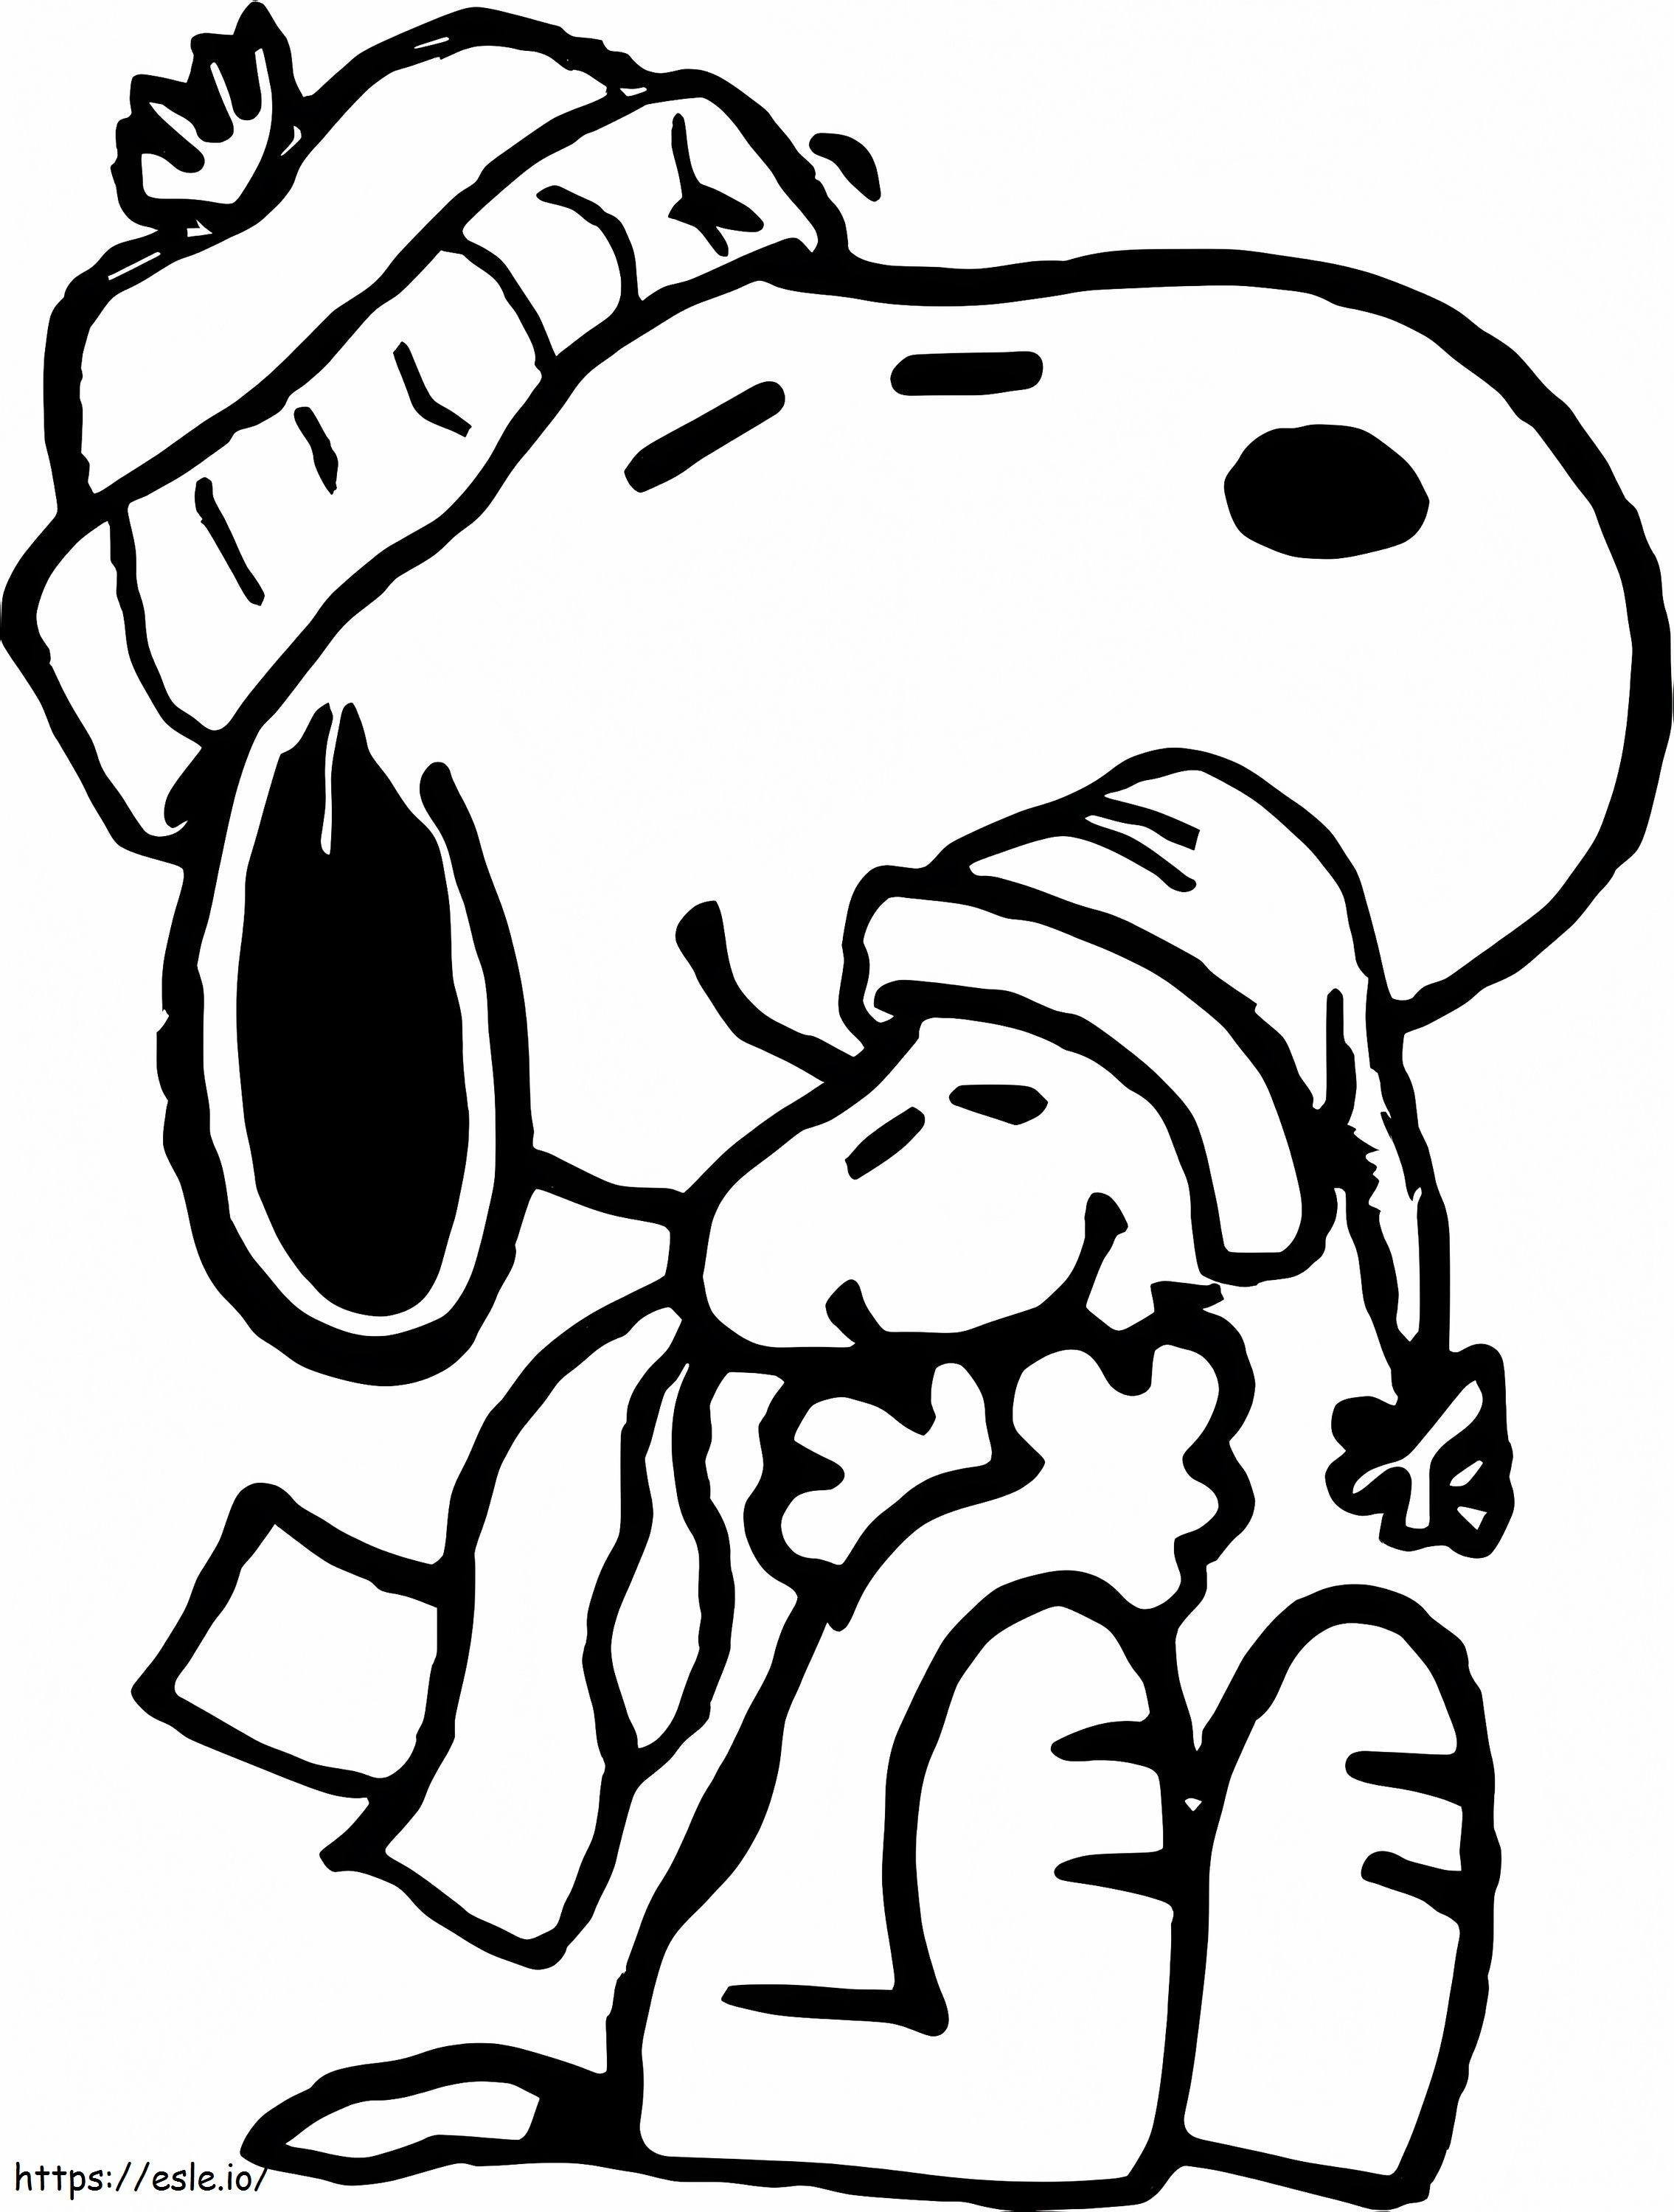 Woodstock And Snoopy coloring page